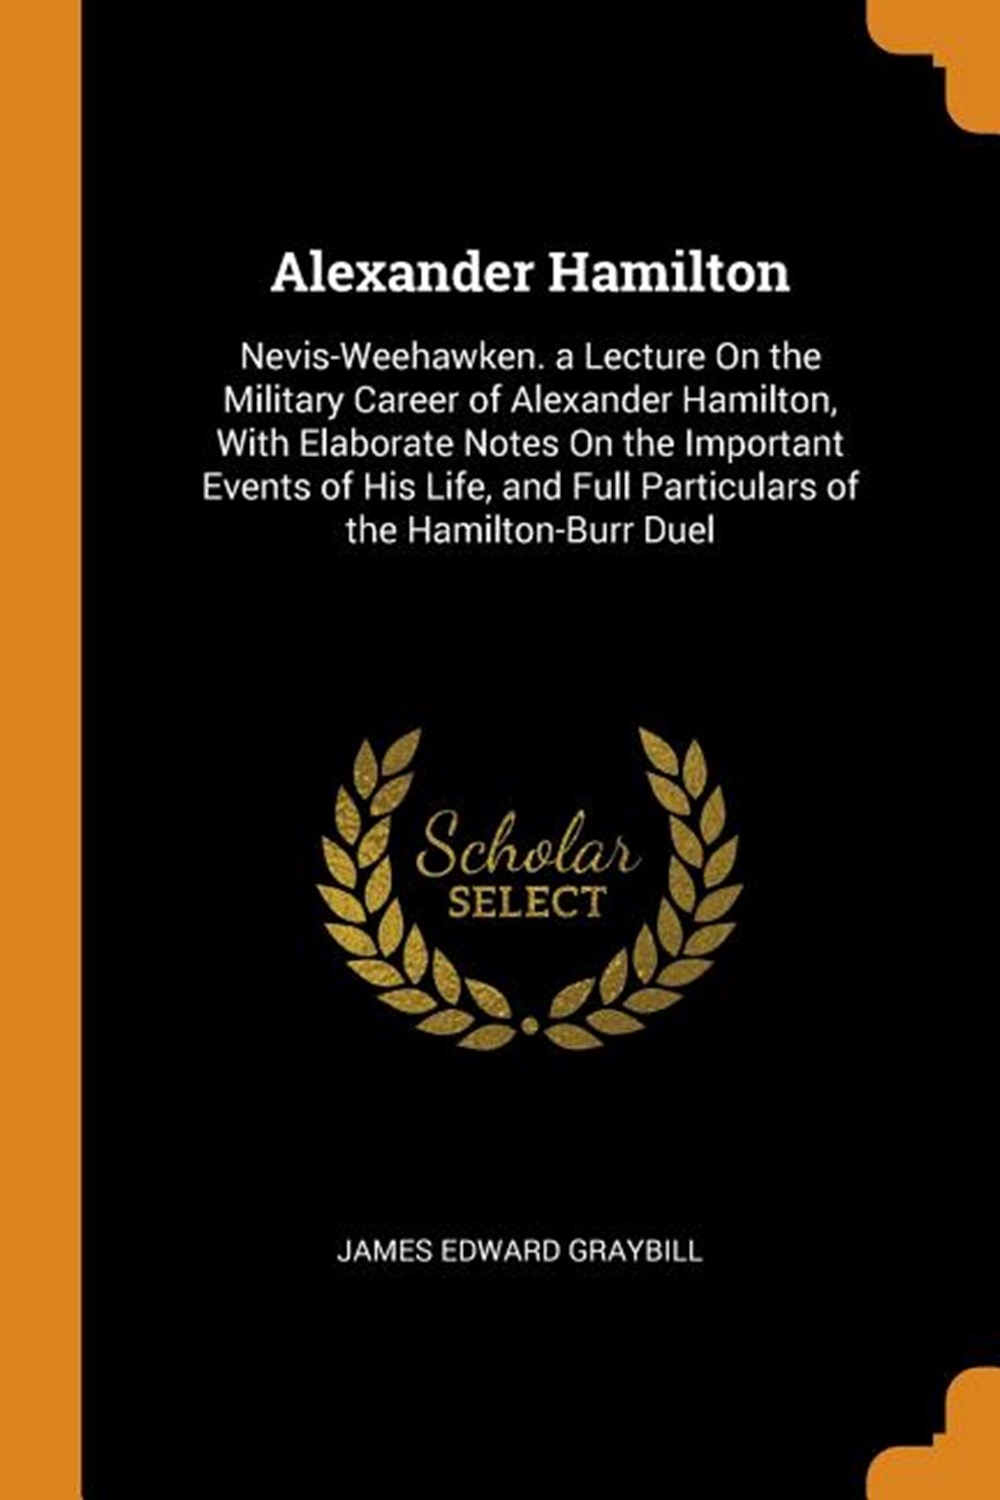 Alexander Hamilton: Nevis-Weehawken. a Lecture on the Military Career of Alexander Hamilton, with El